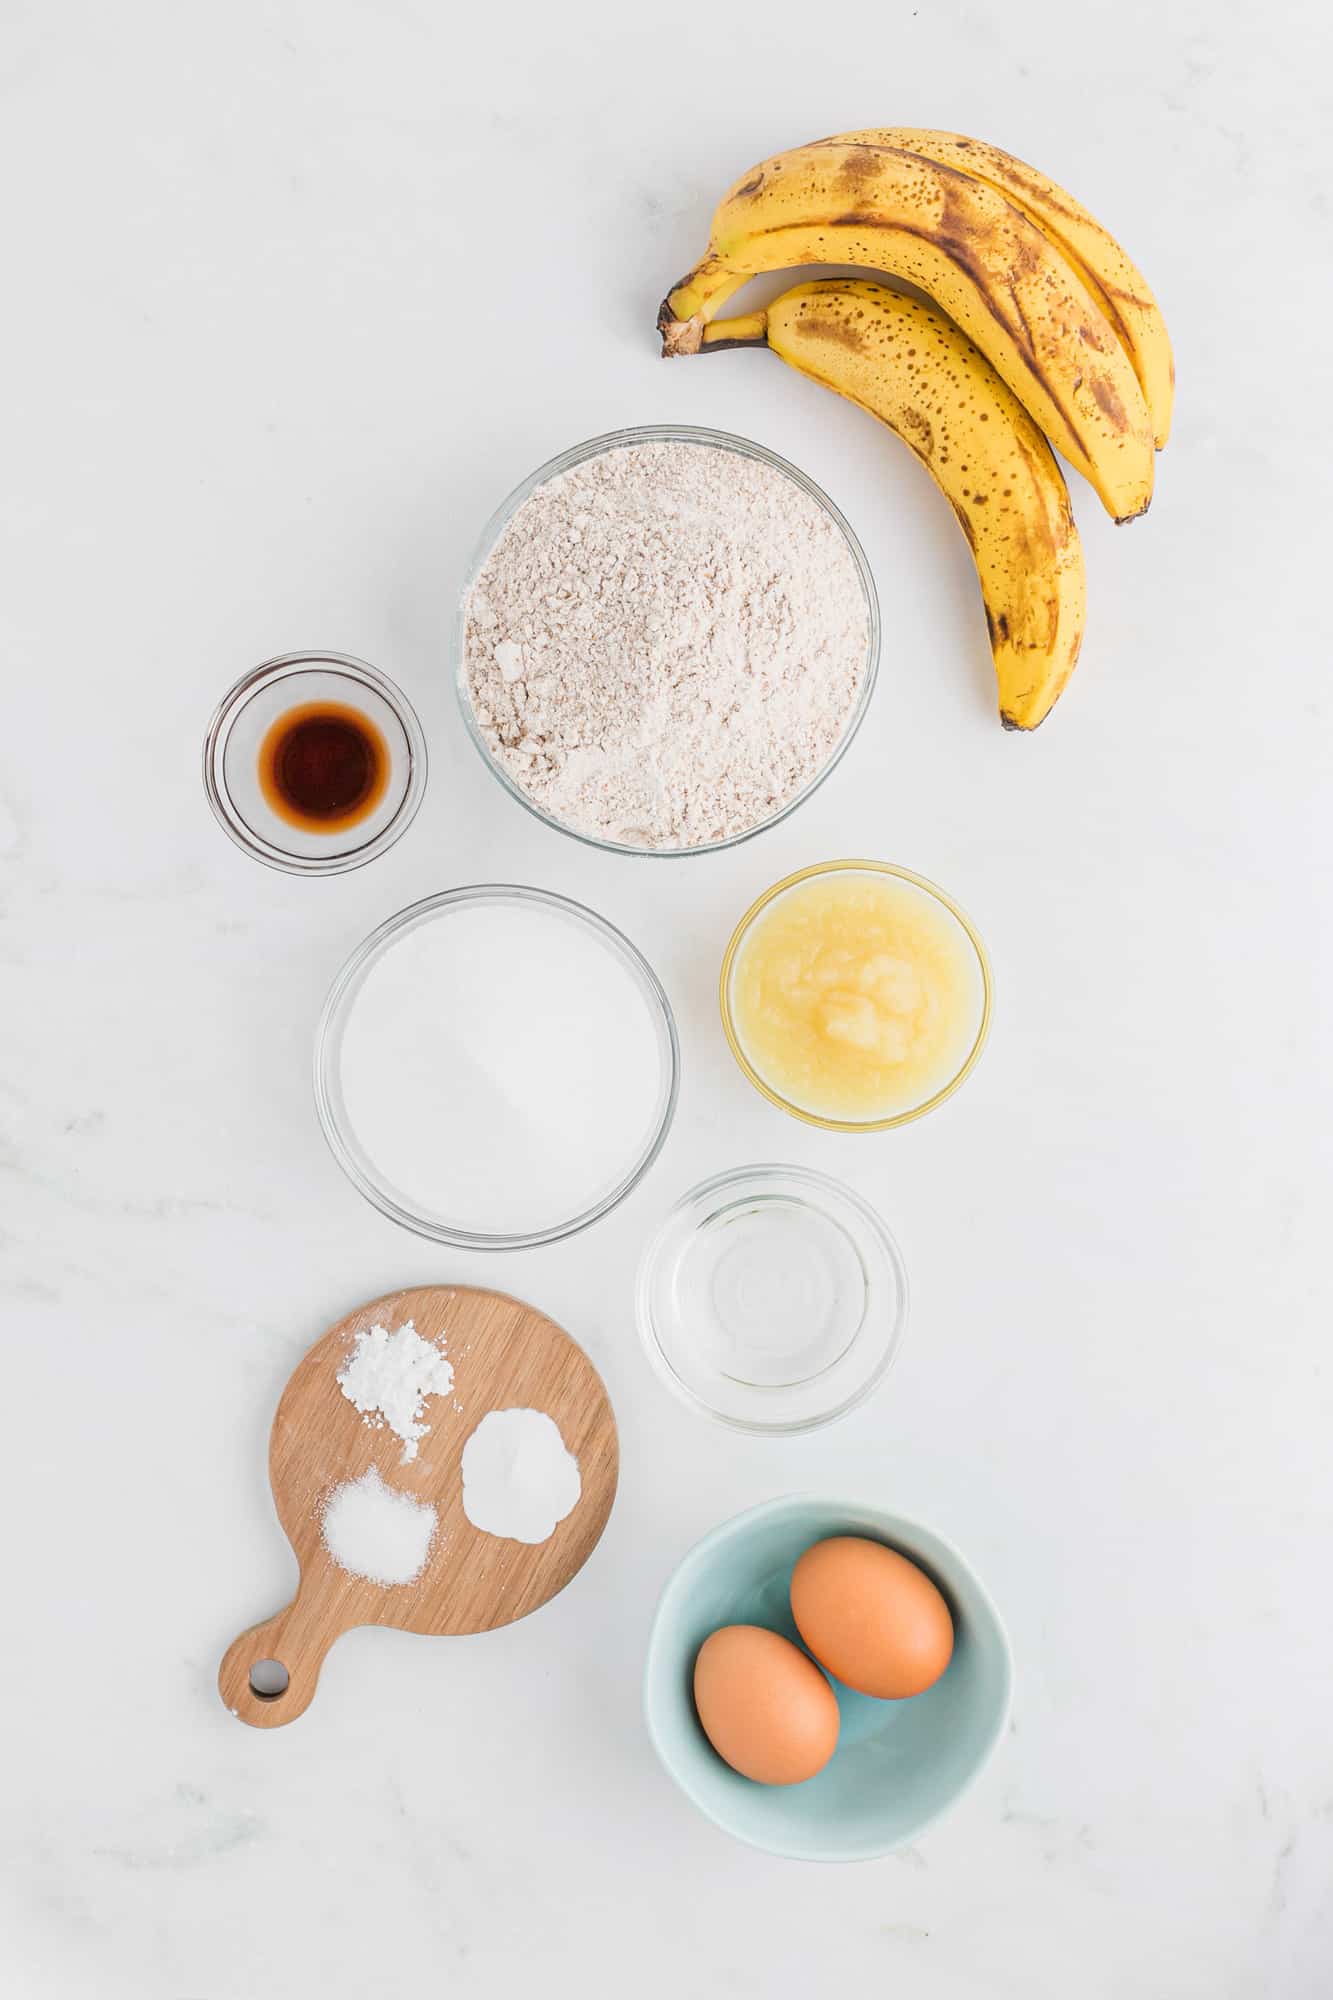 Ingredients in separate dishes, including eggs and bananas.